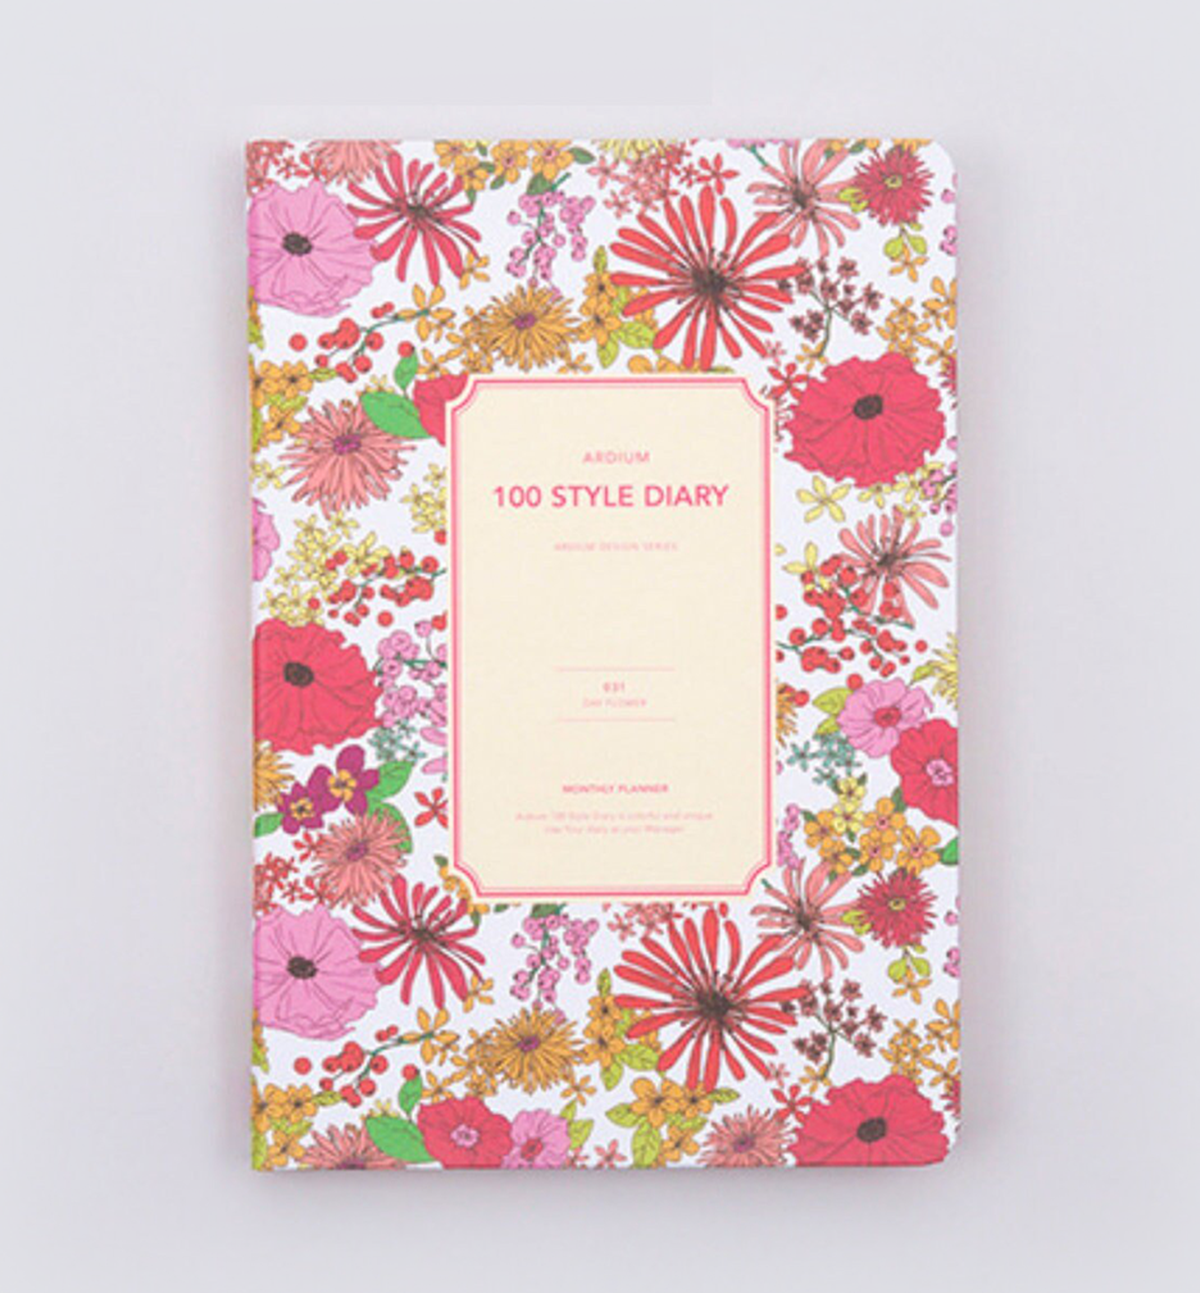 100 Style Diary [Day Flower]